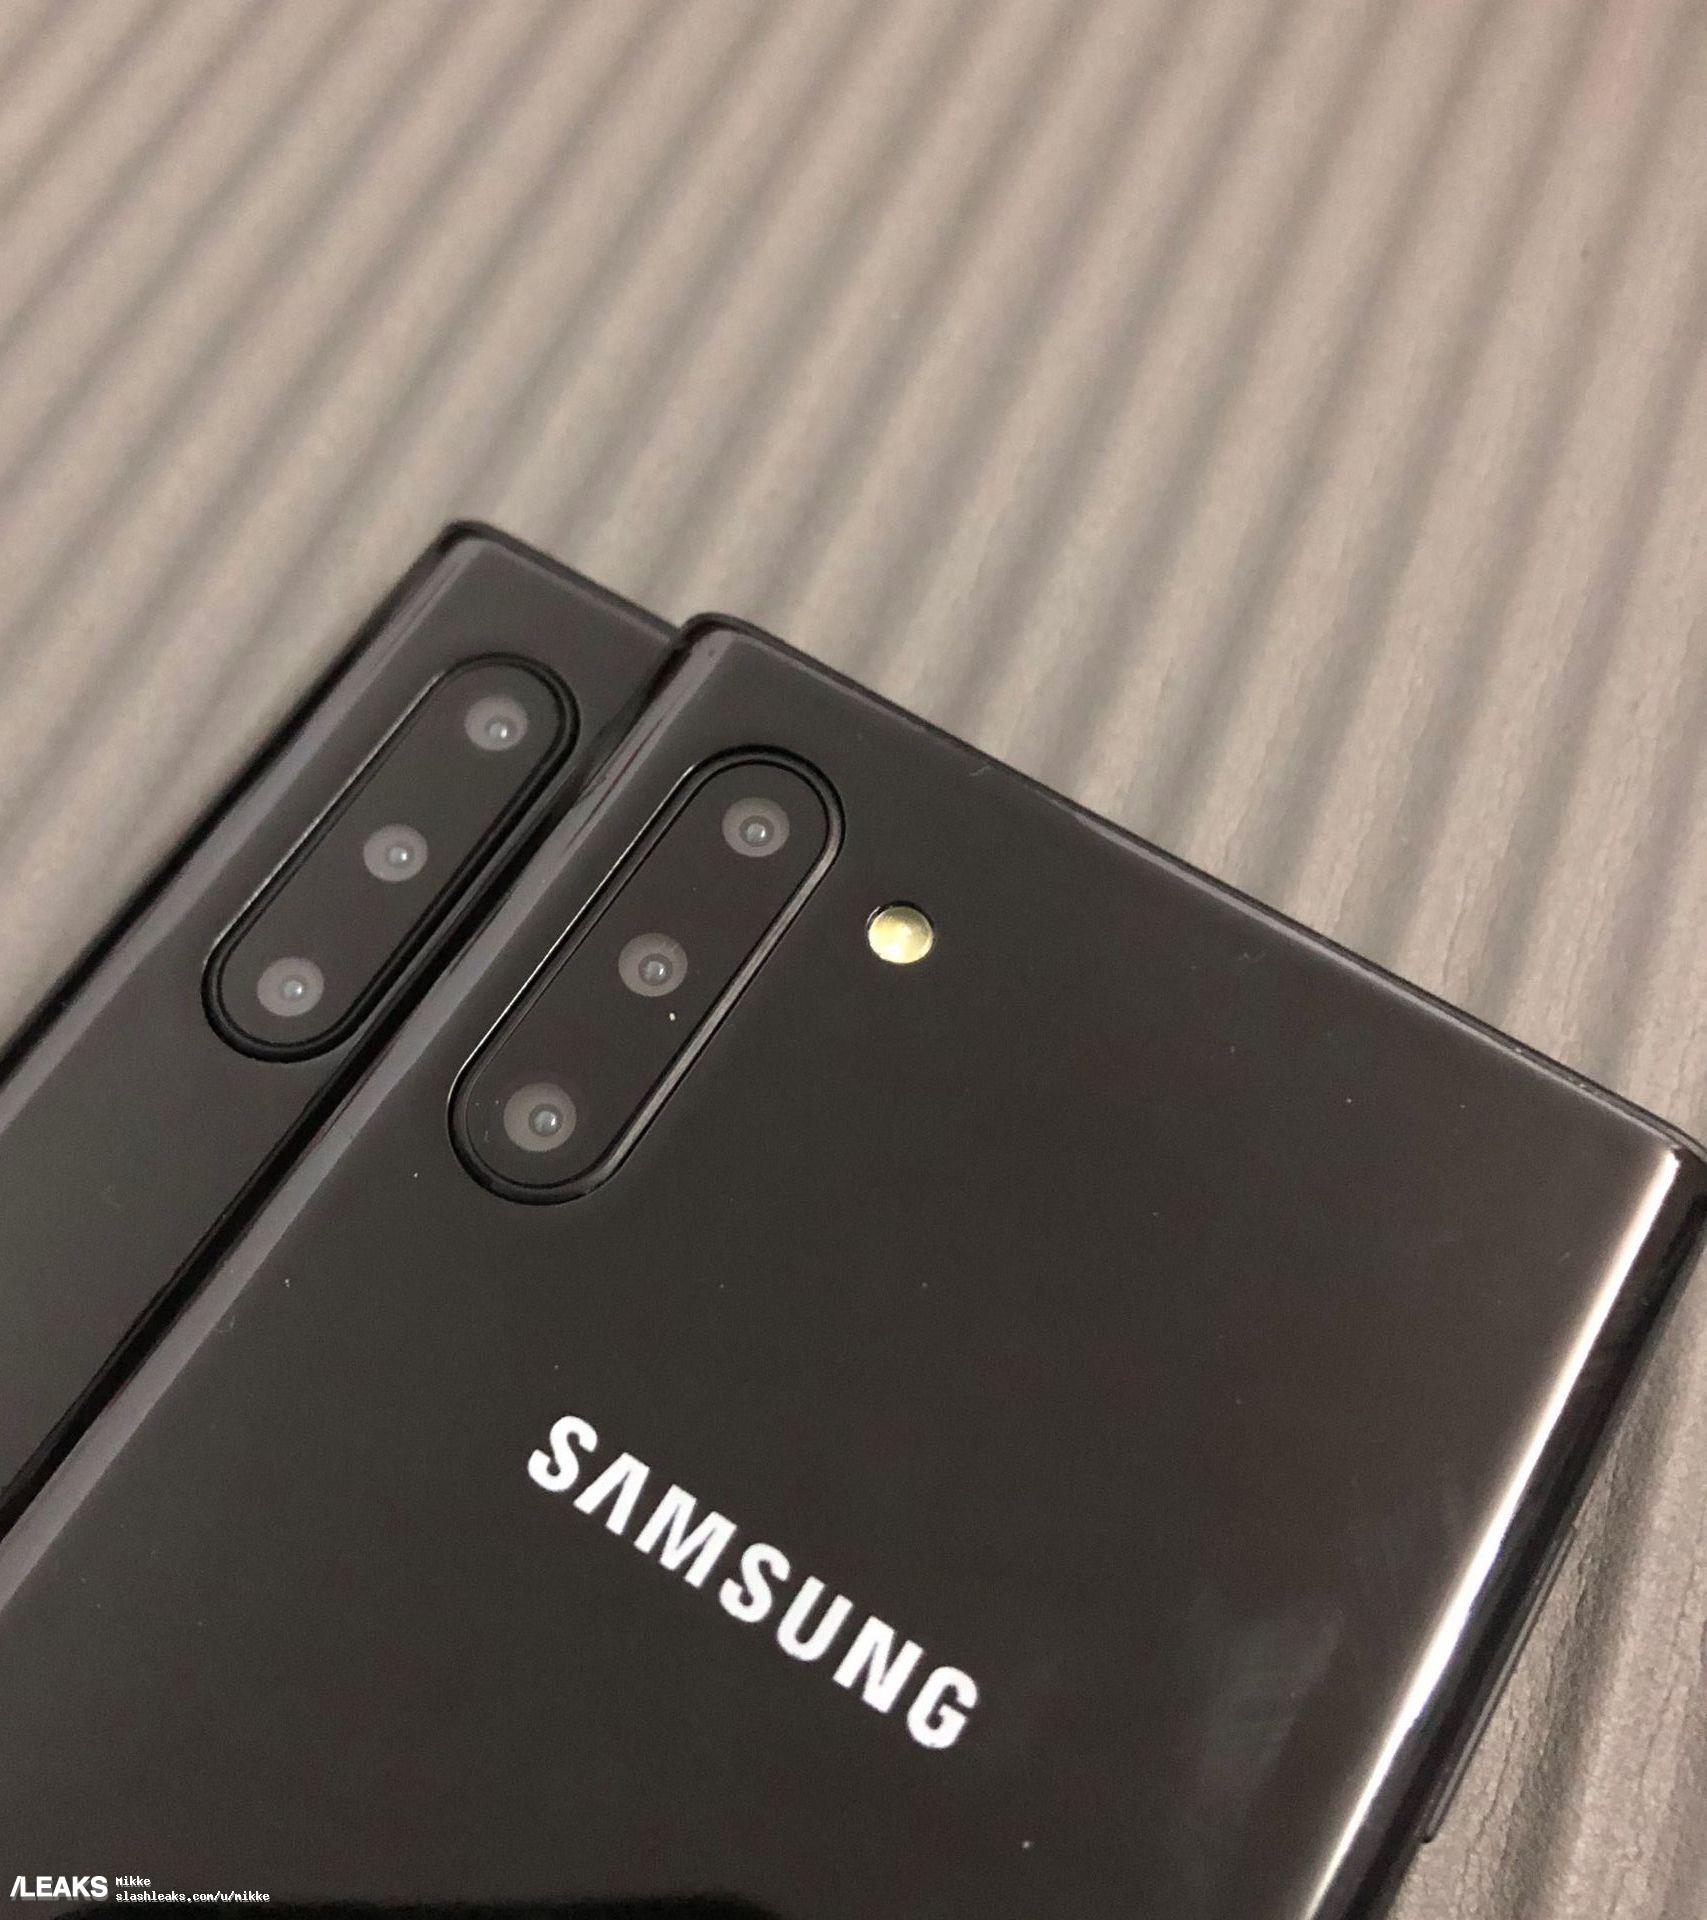 galaxy note 10 and galaxy note 10 plus dummies 441